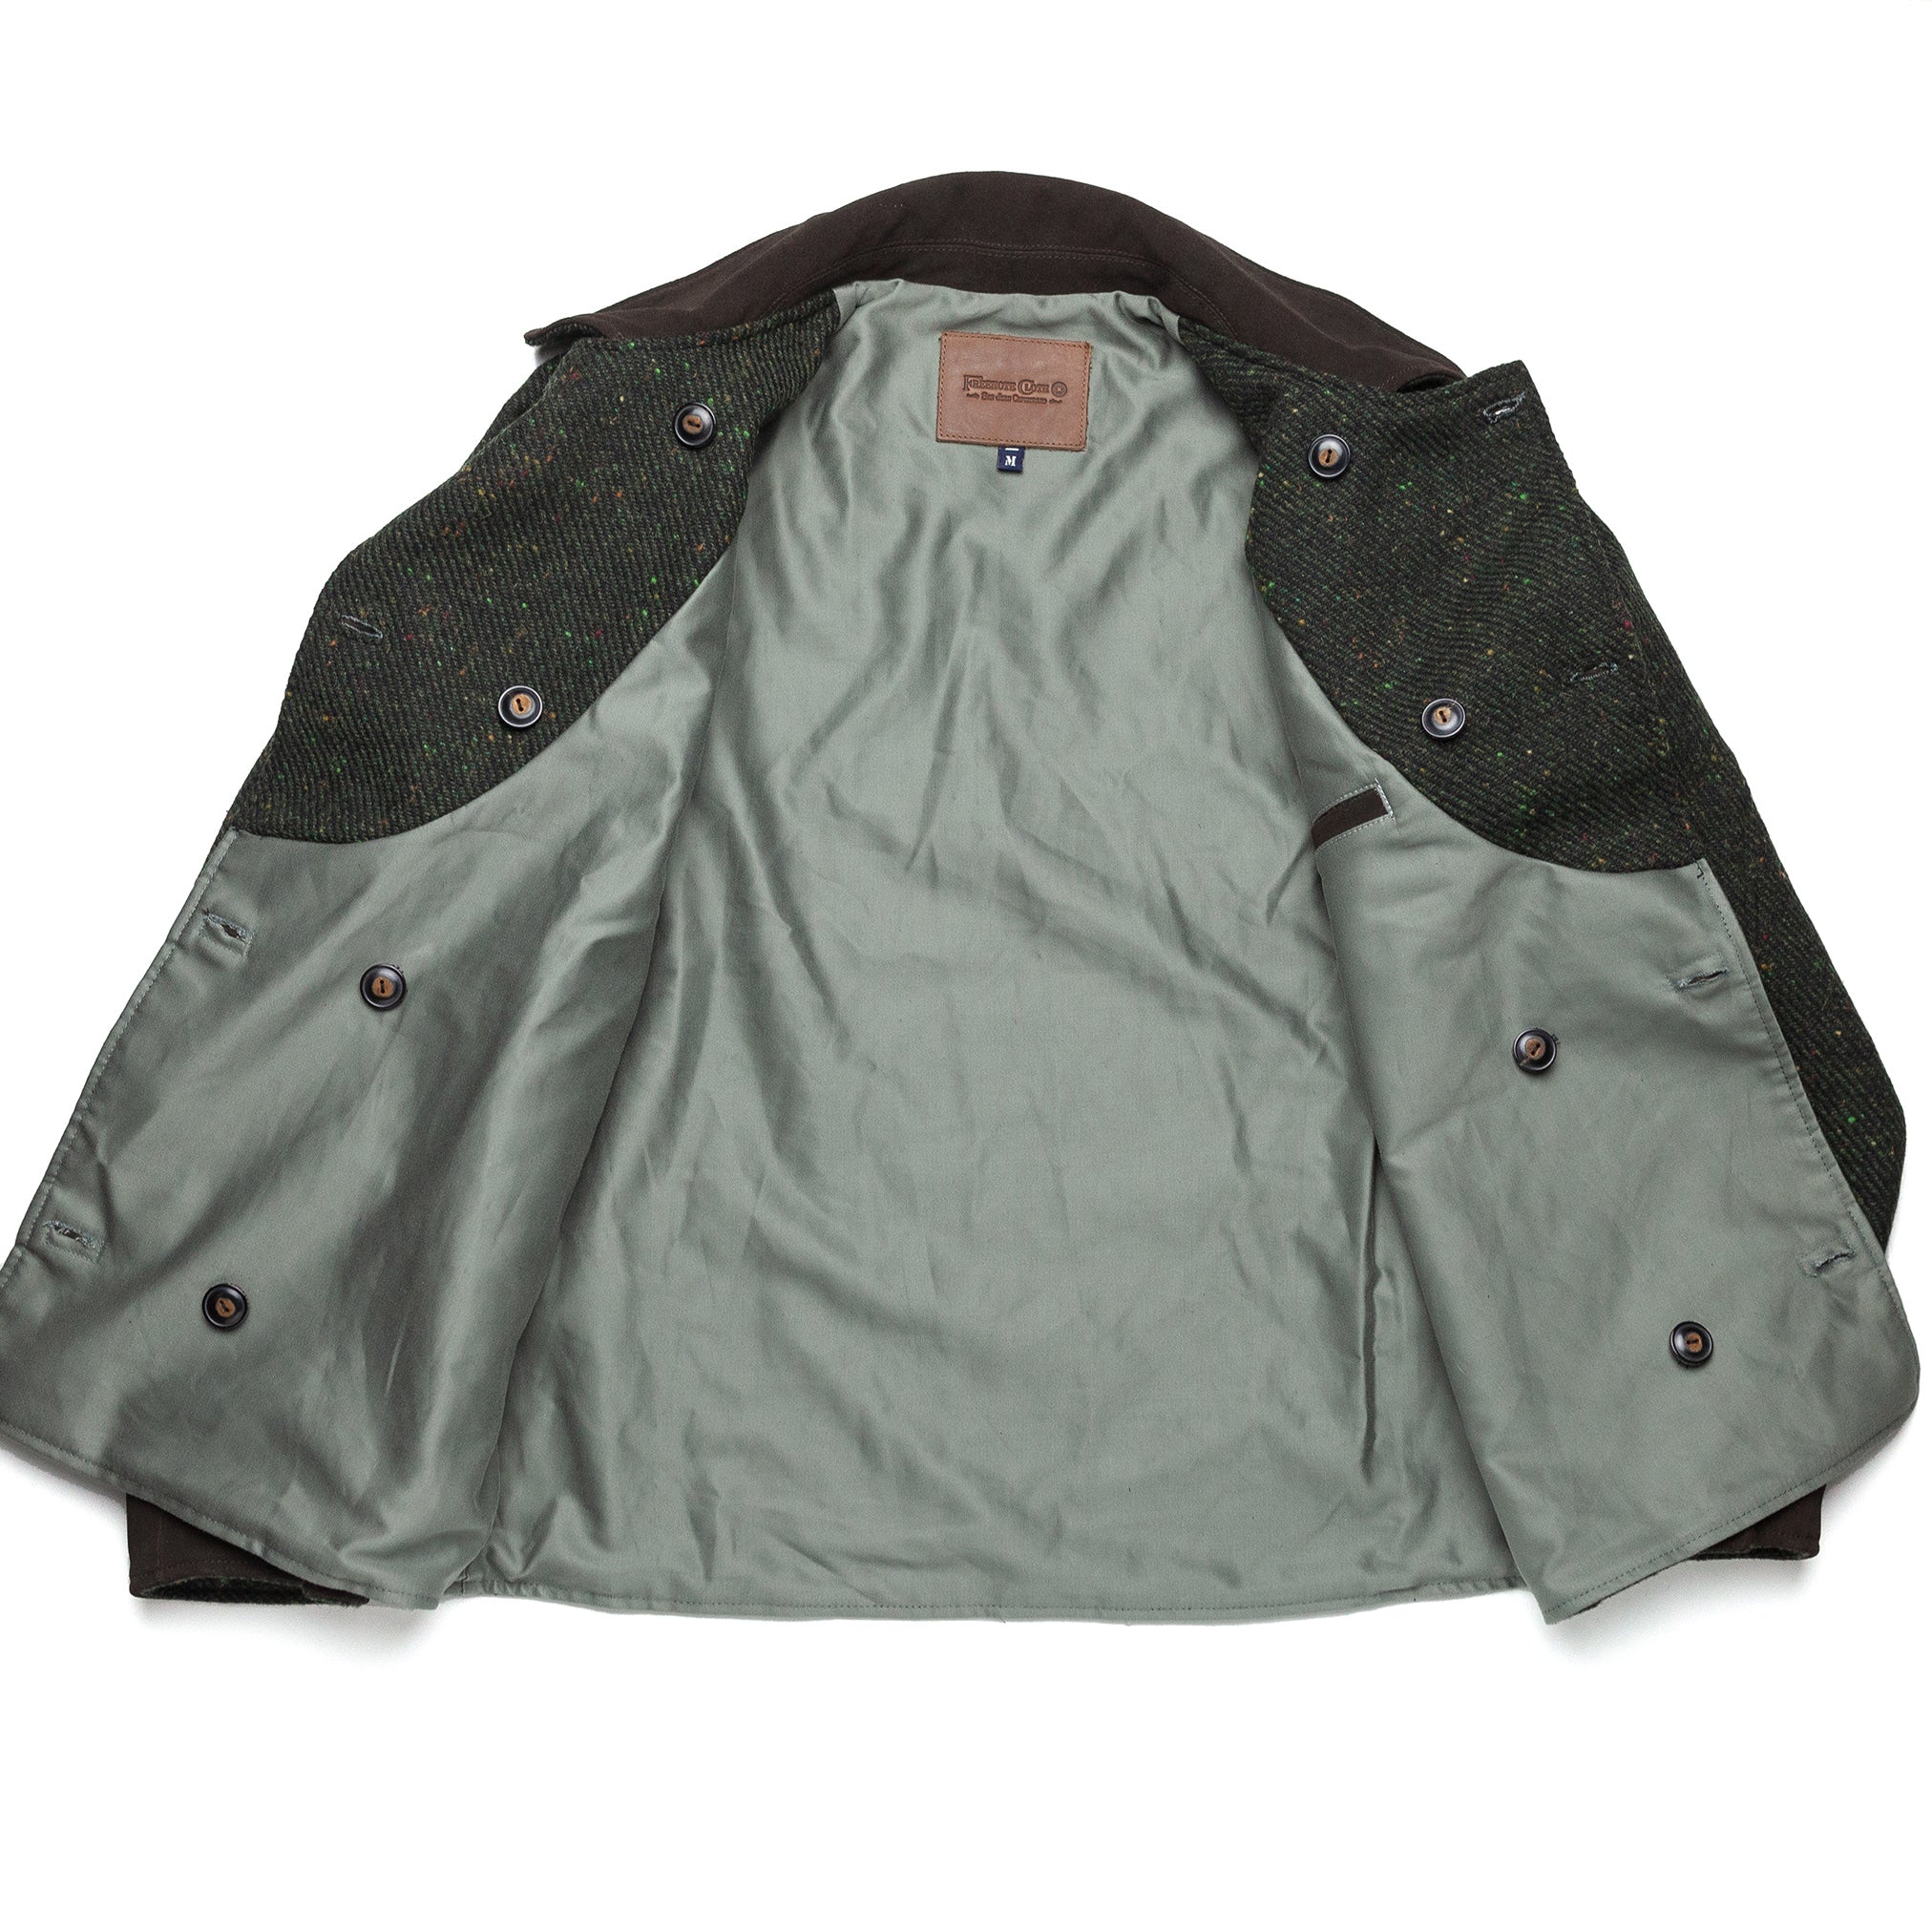 The Wells Jacket in Olive